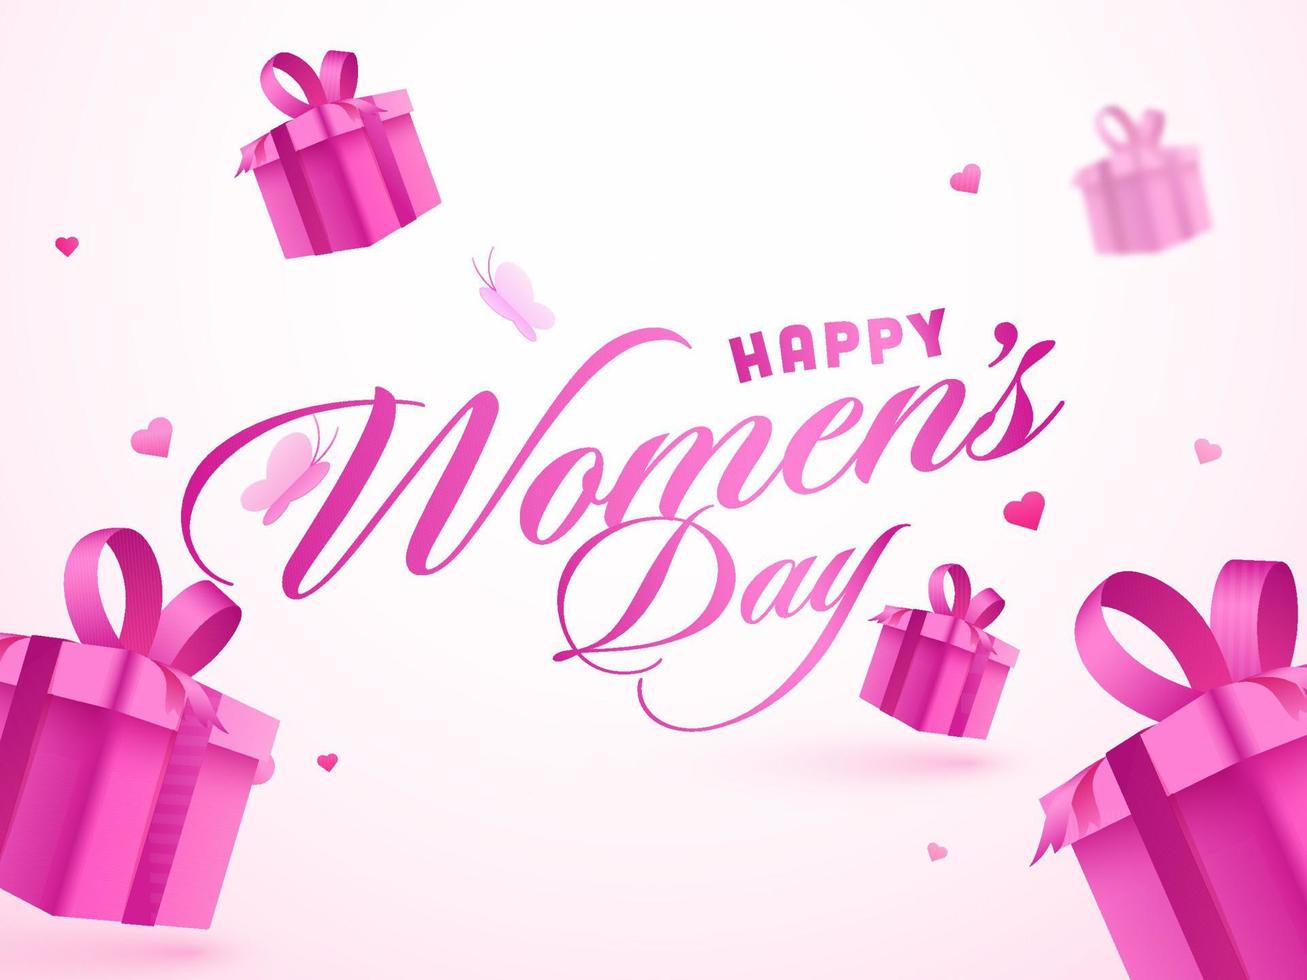 Pink Happy Women's Day Font with 3D Gift Boxes, Hearts and Paper Butterflies Decorated on White Background. vector